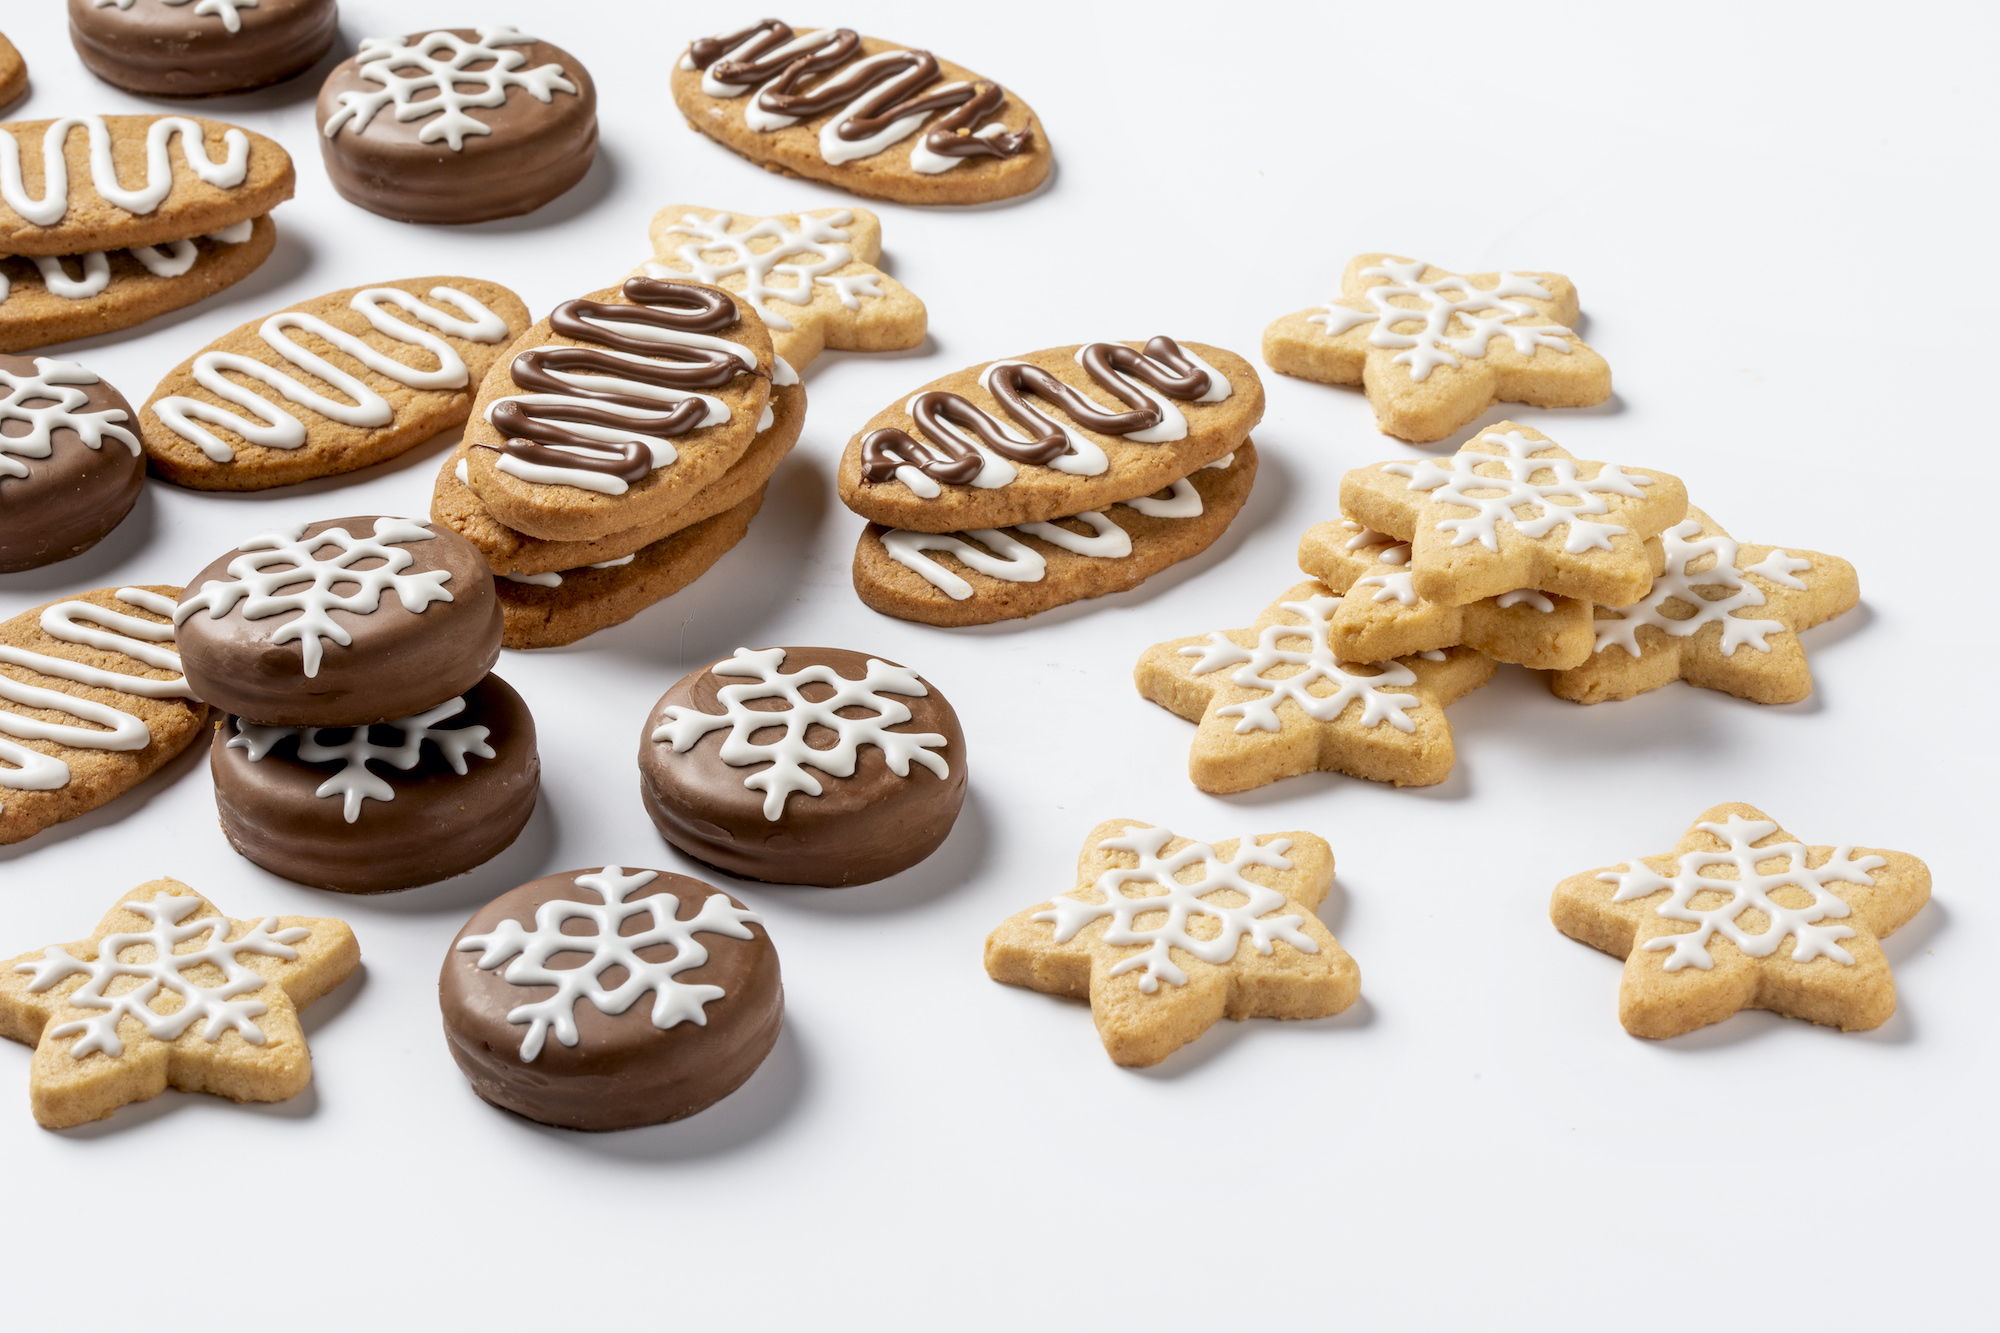 Cookies decorated with chocolate in she shape of a star